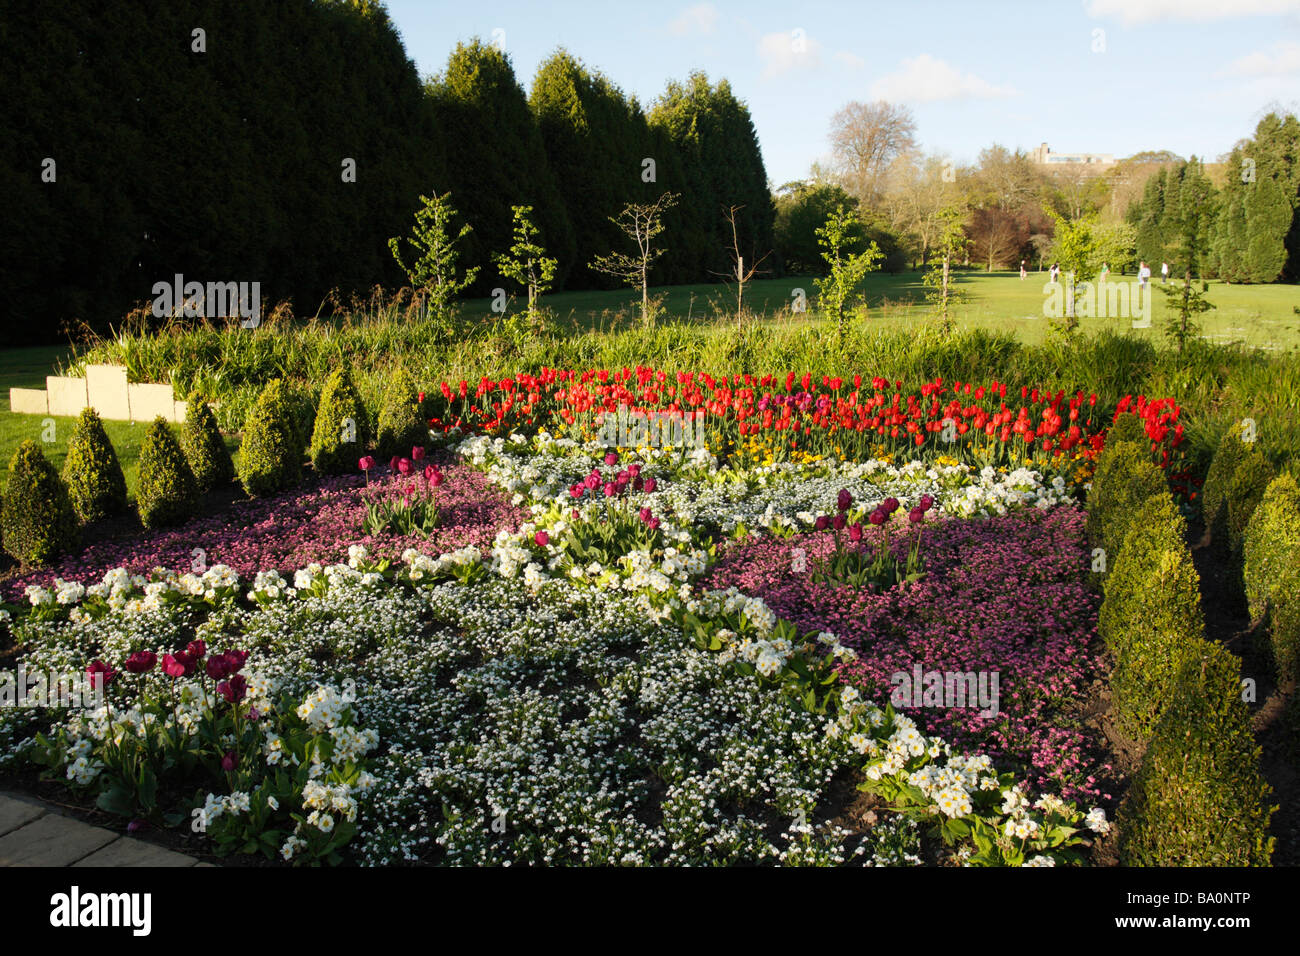 Colourful Flower Beds, Bute Park, Cardiff, Glamorgan, South Wales, U.K. Stock Photo